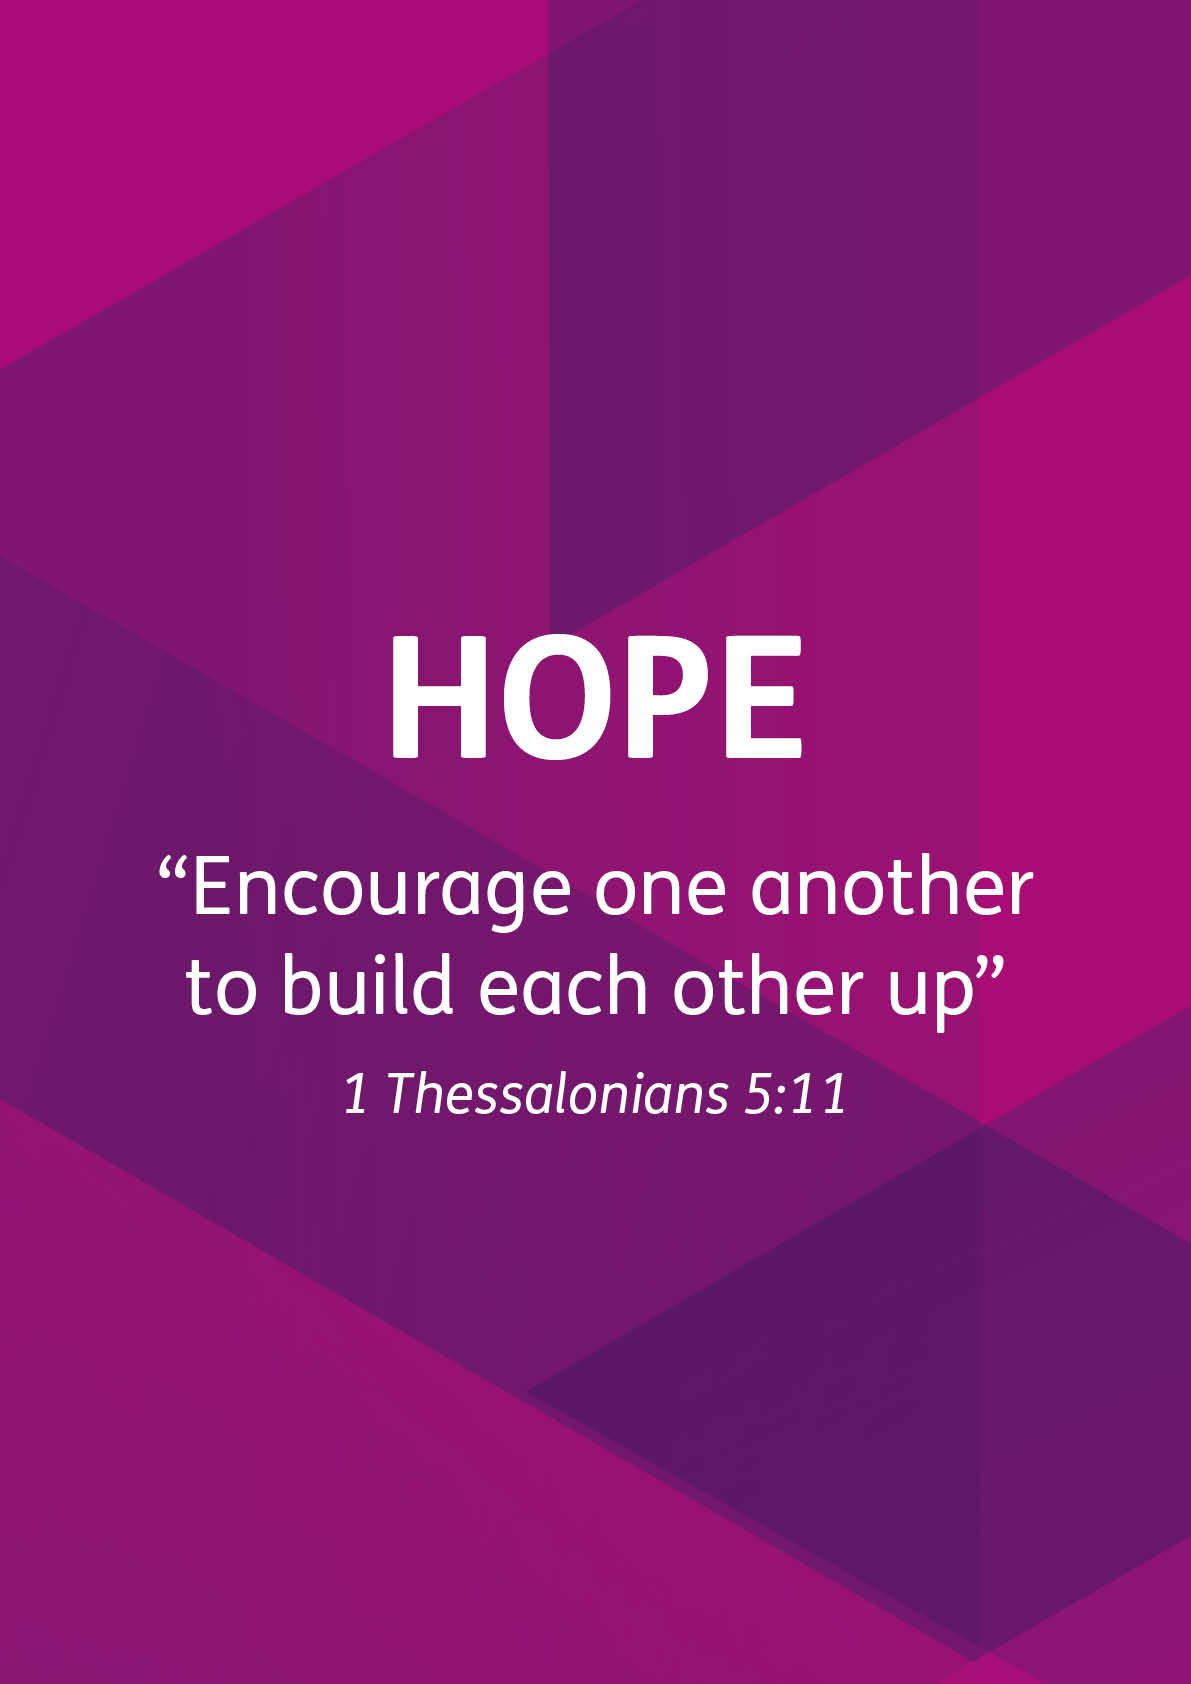 Hope. “Encourage one another to build each other up” 1 Thessalonians 5:11